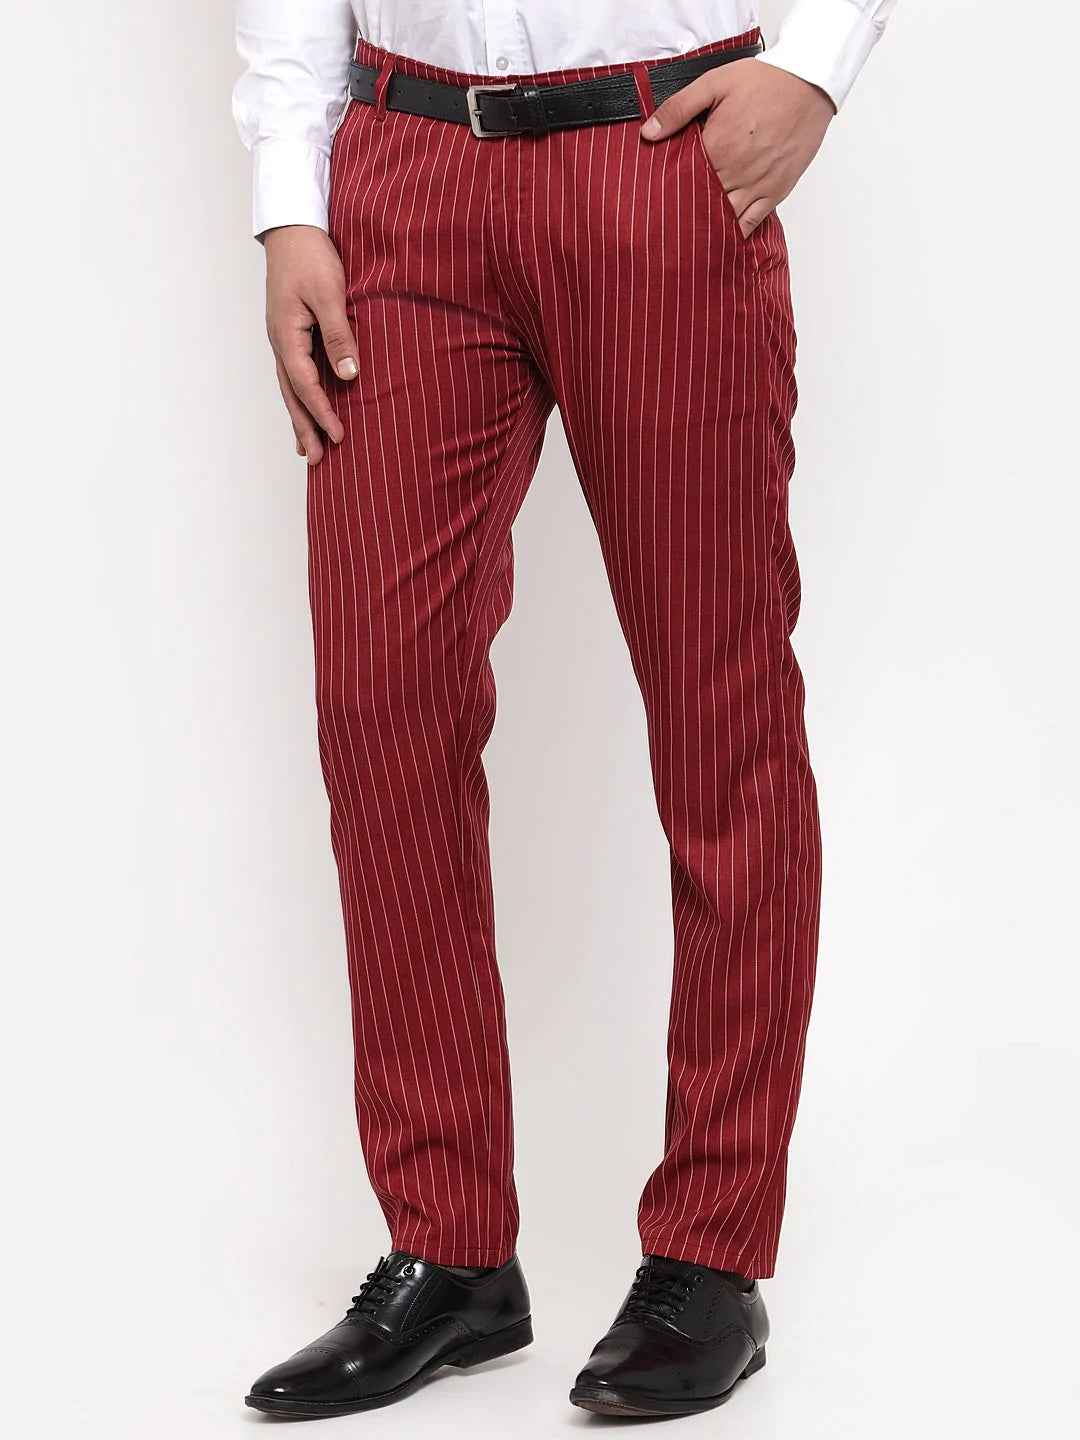 Jainish Men's Red Cotton Striped Formal Trousers ( FGP 255Maroon )